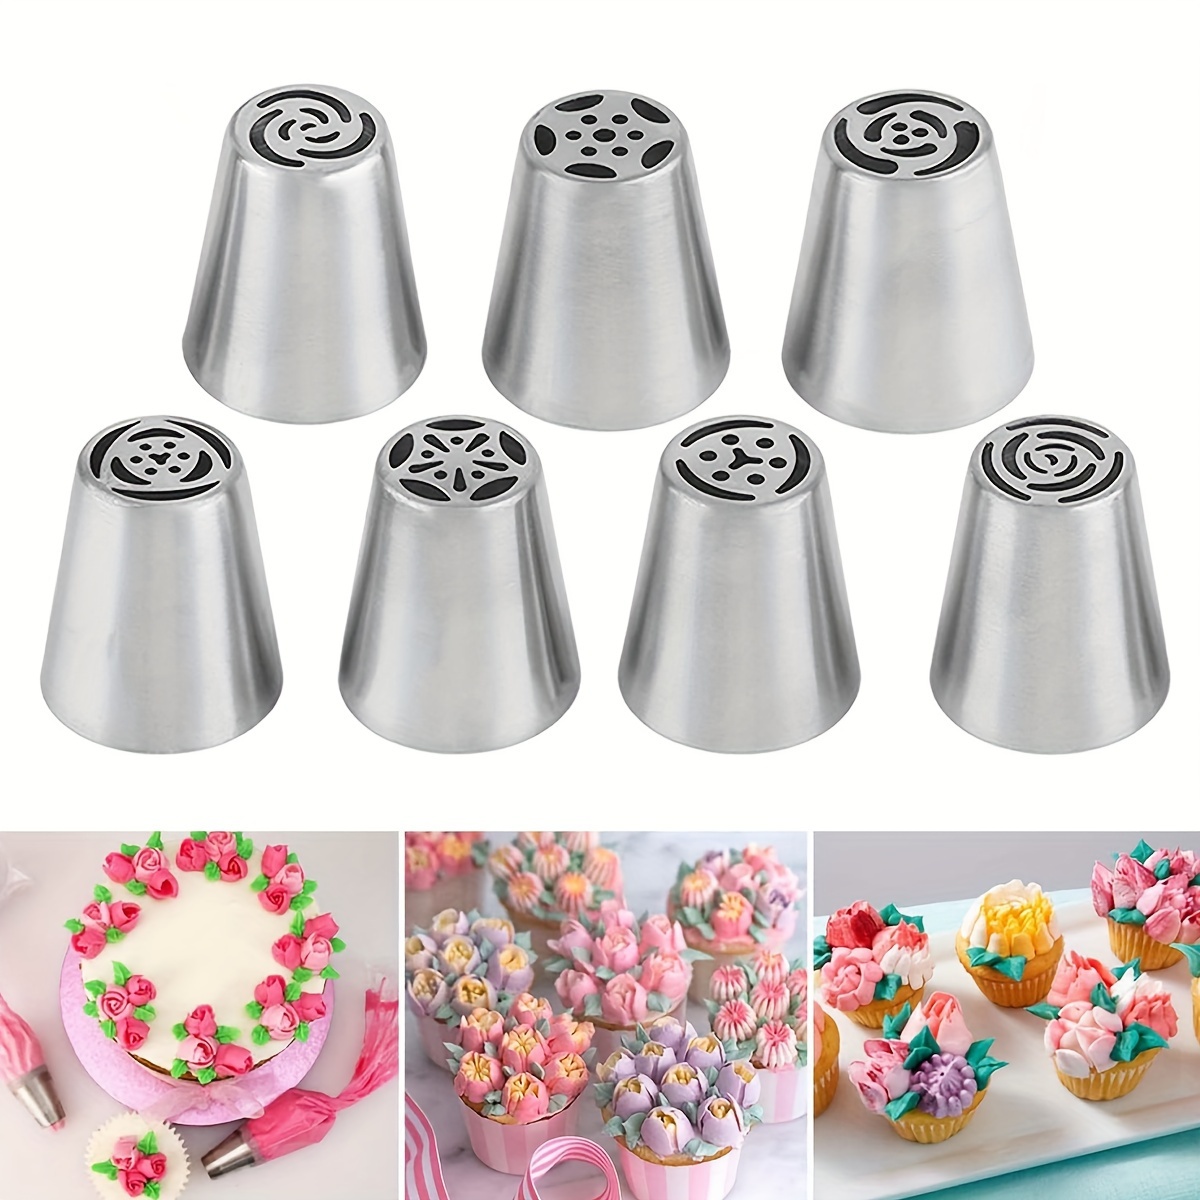 

7 Pcs Russian Piping Tips Set, Stainless Steel Cupcake Flower Shaped Frosting Nozzle Kit, Kitchen Gadgets, For Pastry Cupcakes Cakes Decorating, Baking Tools